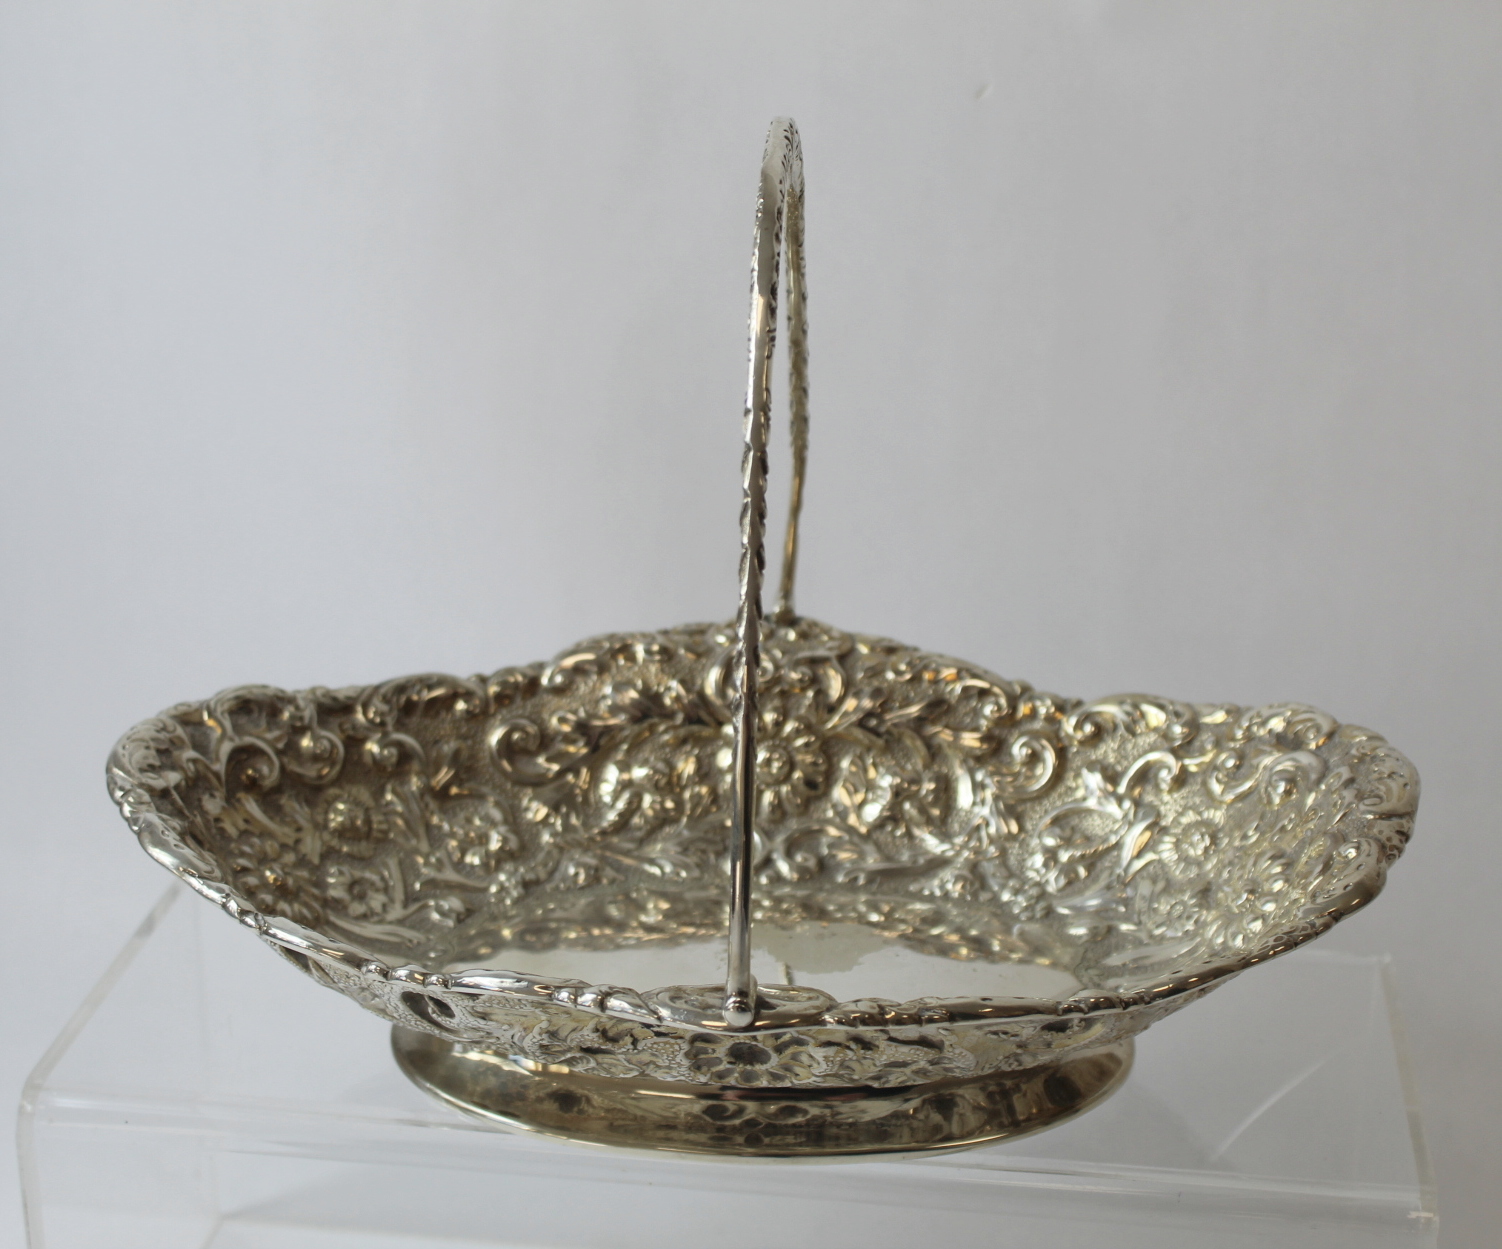 Silver cake basket oval with embossed scrolls and flowerheads by Finley & Taylor 1888. 9oz.